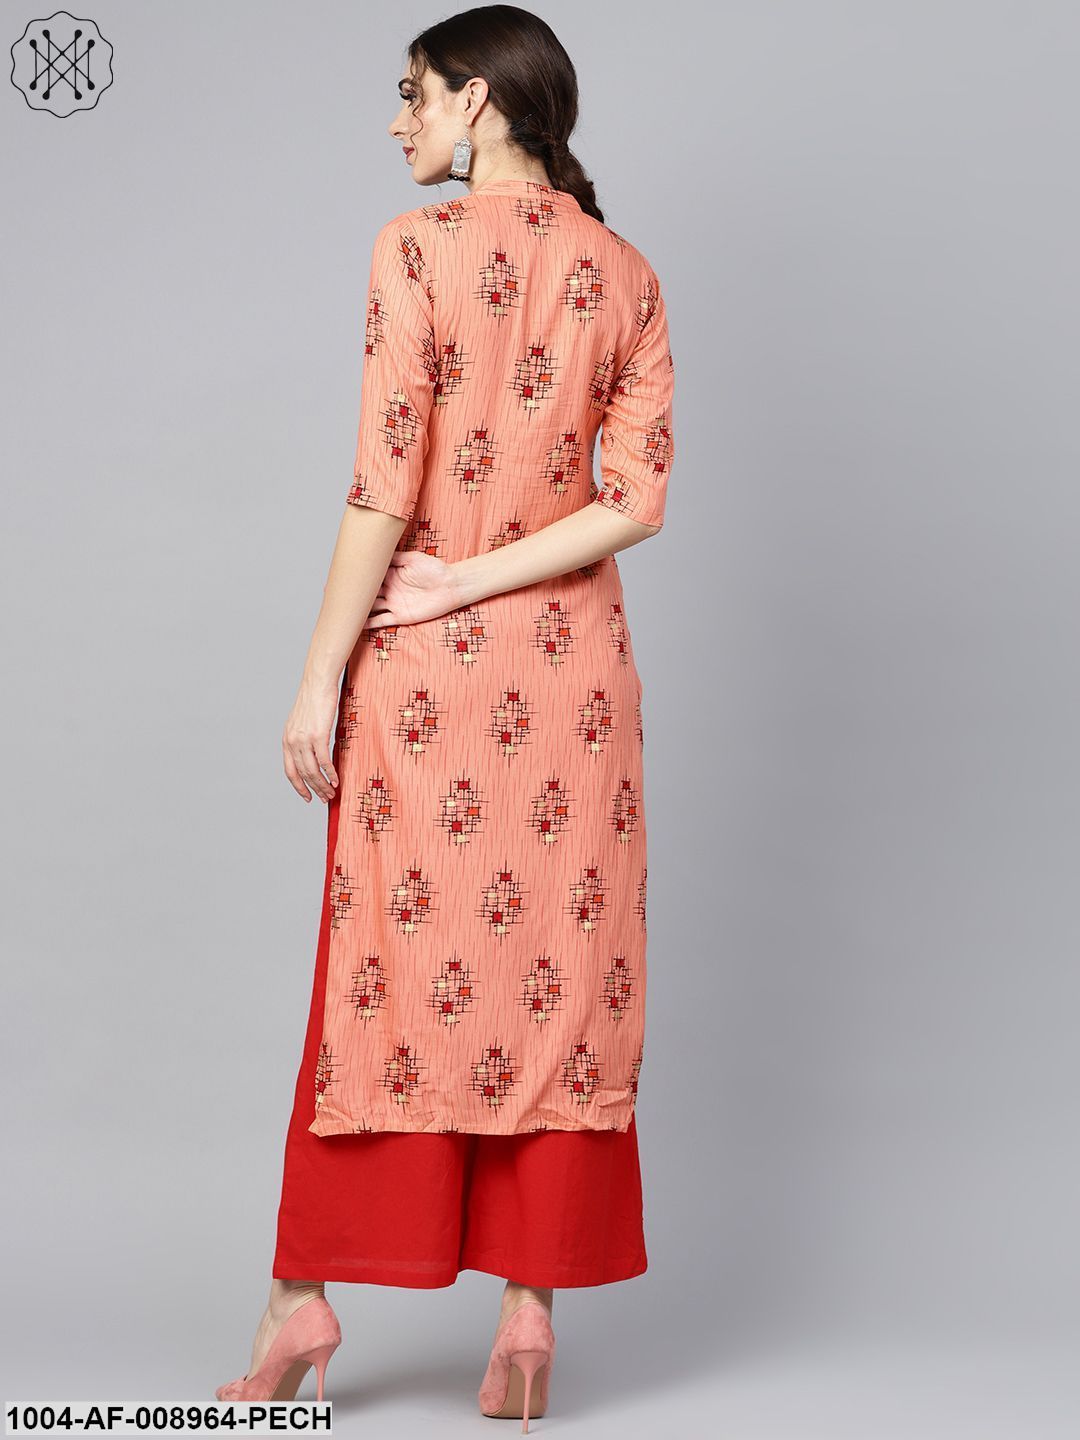 Geometric Gold Khari Printed Straight Kurta With Multi Slits And Button Detailing, With Solid Red Palazzo